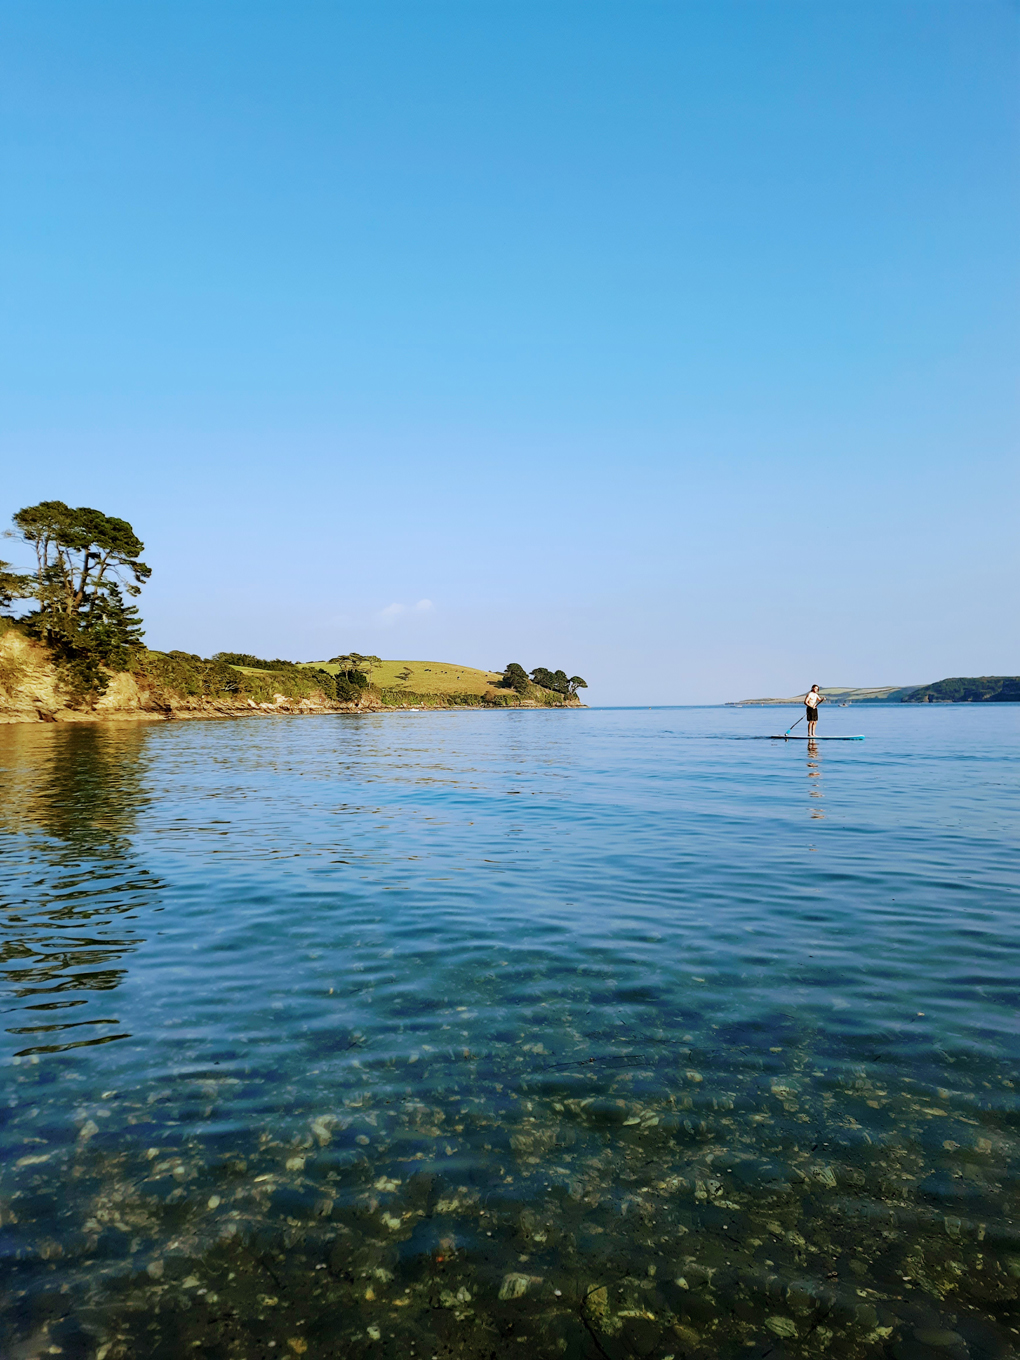 A person standing on a paddle board floats on a calm sea. To the left the coastline rises and falls. In the foreground, the water is clear.